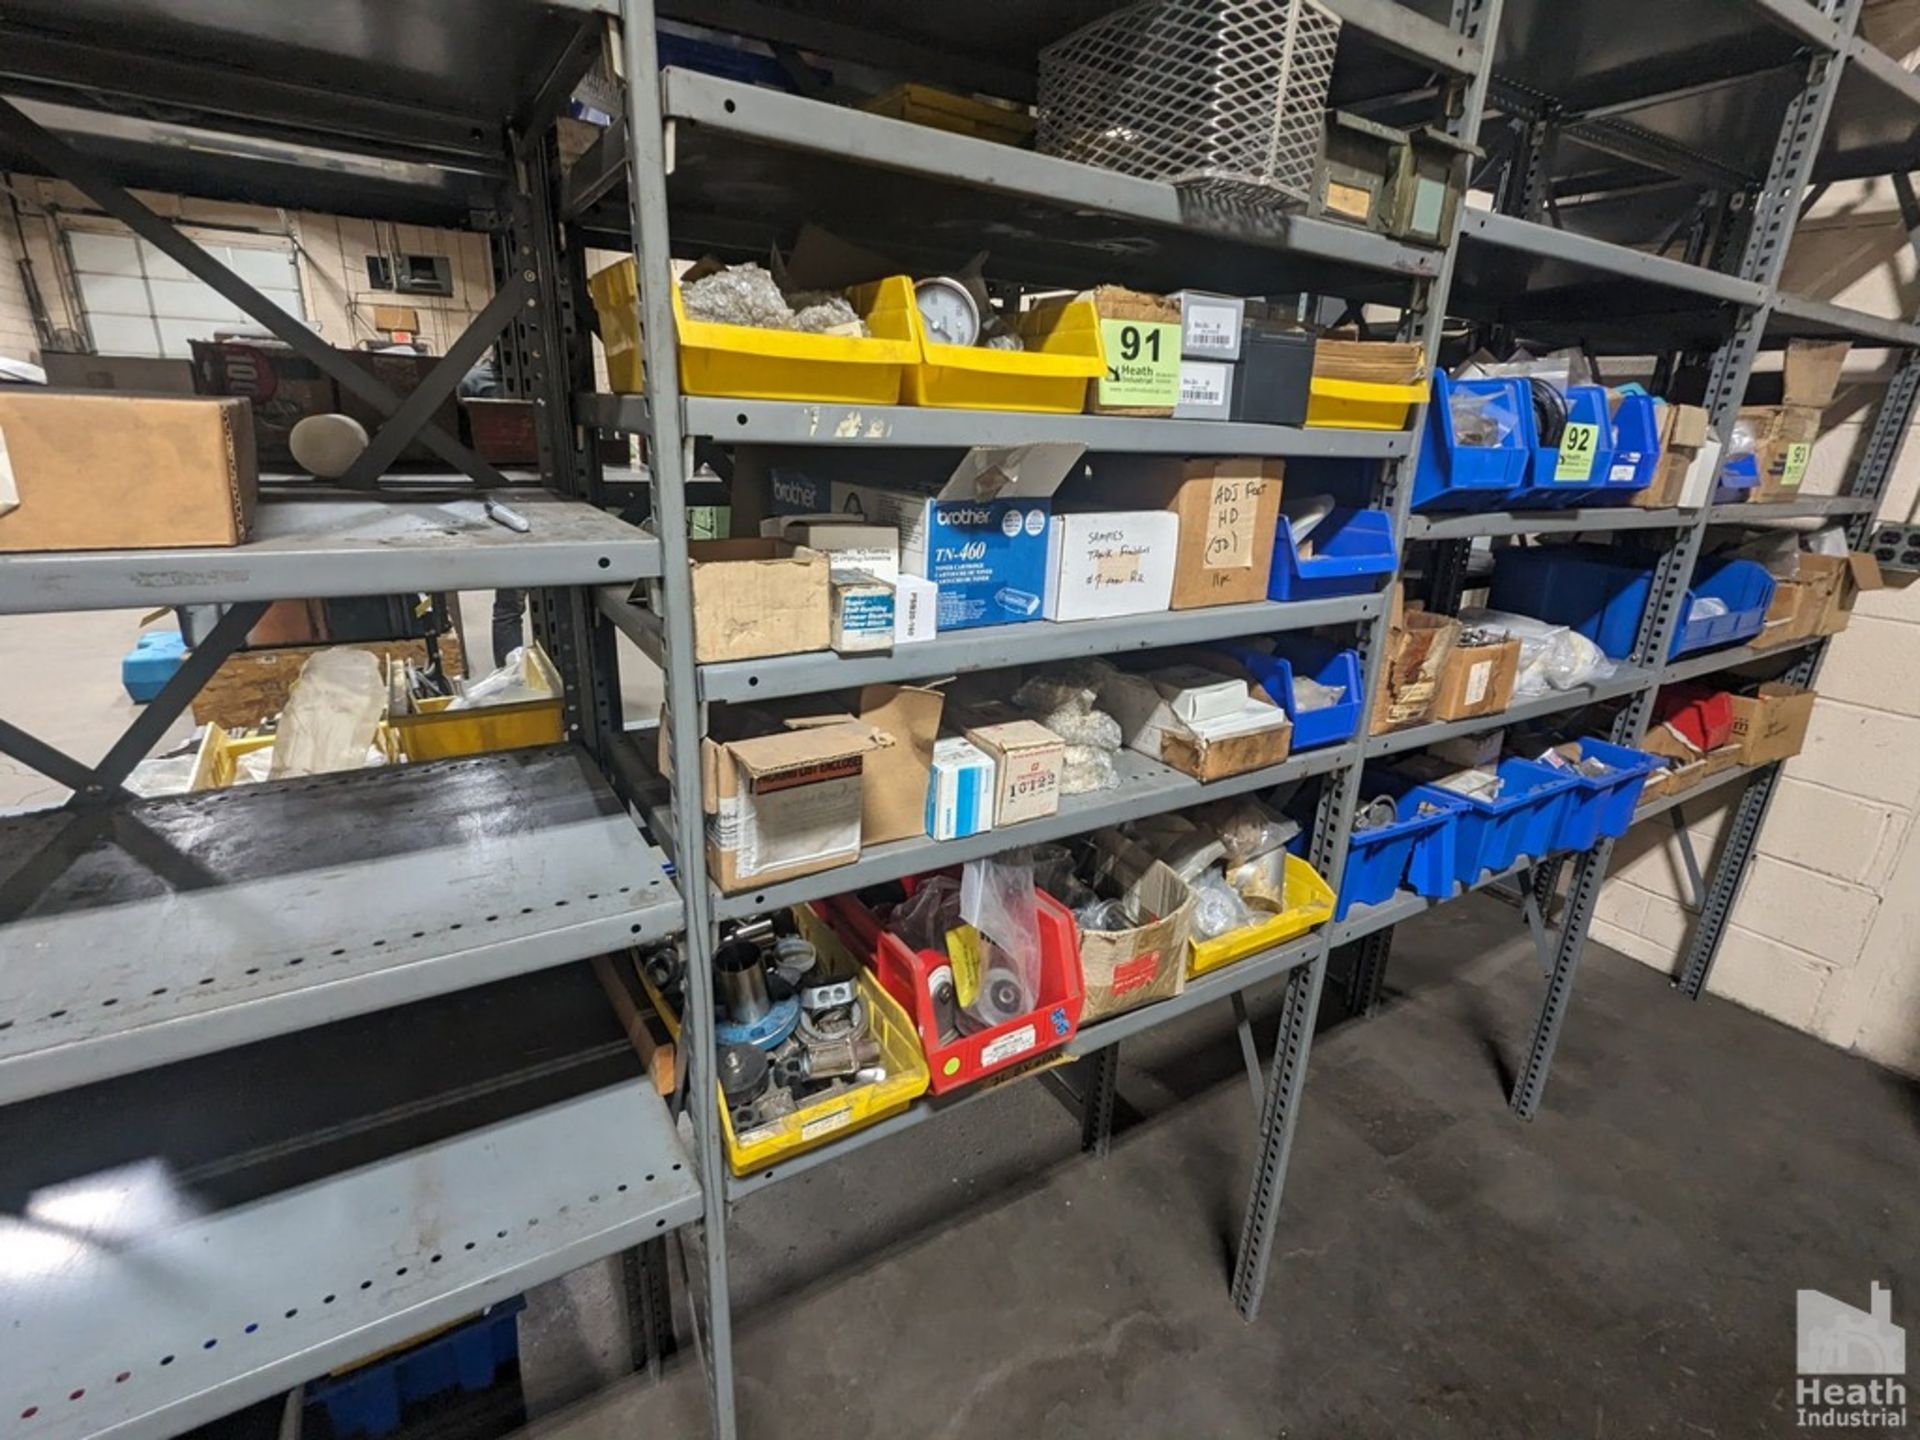 ASSORTED COMPONENTS ON FIVE SHELVES